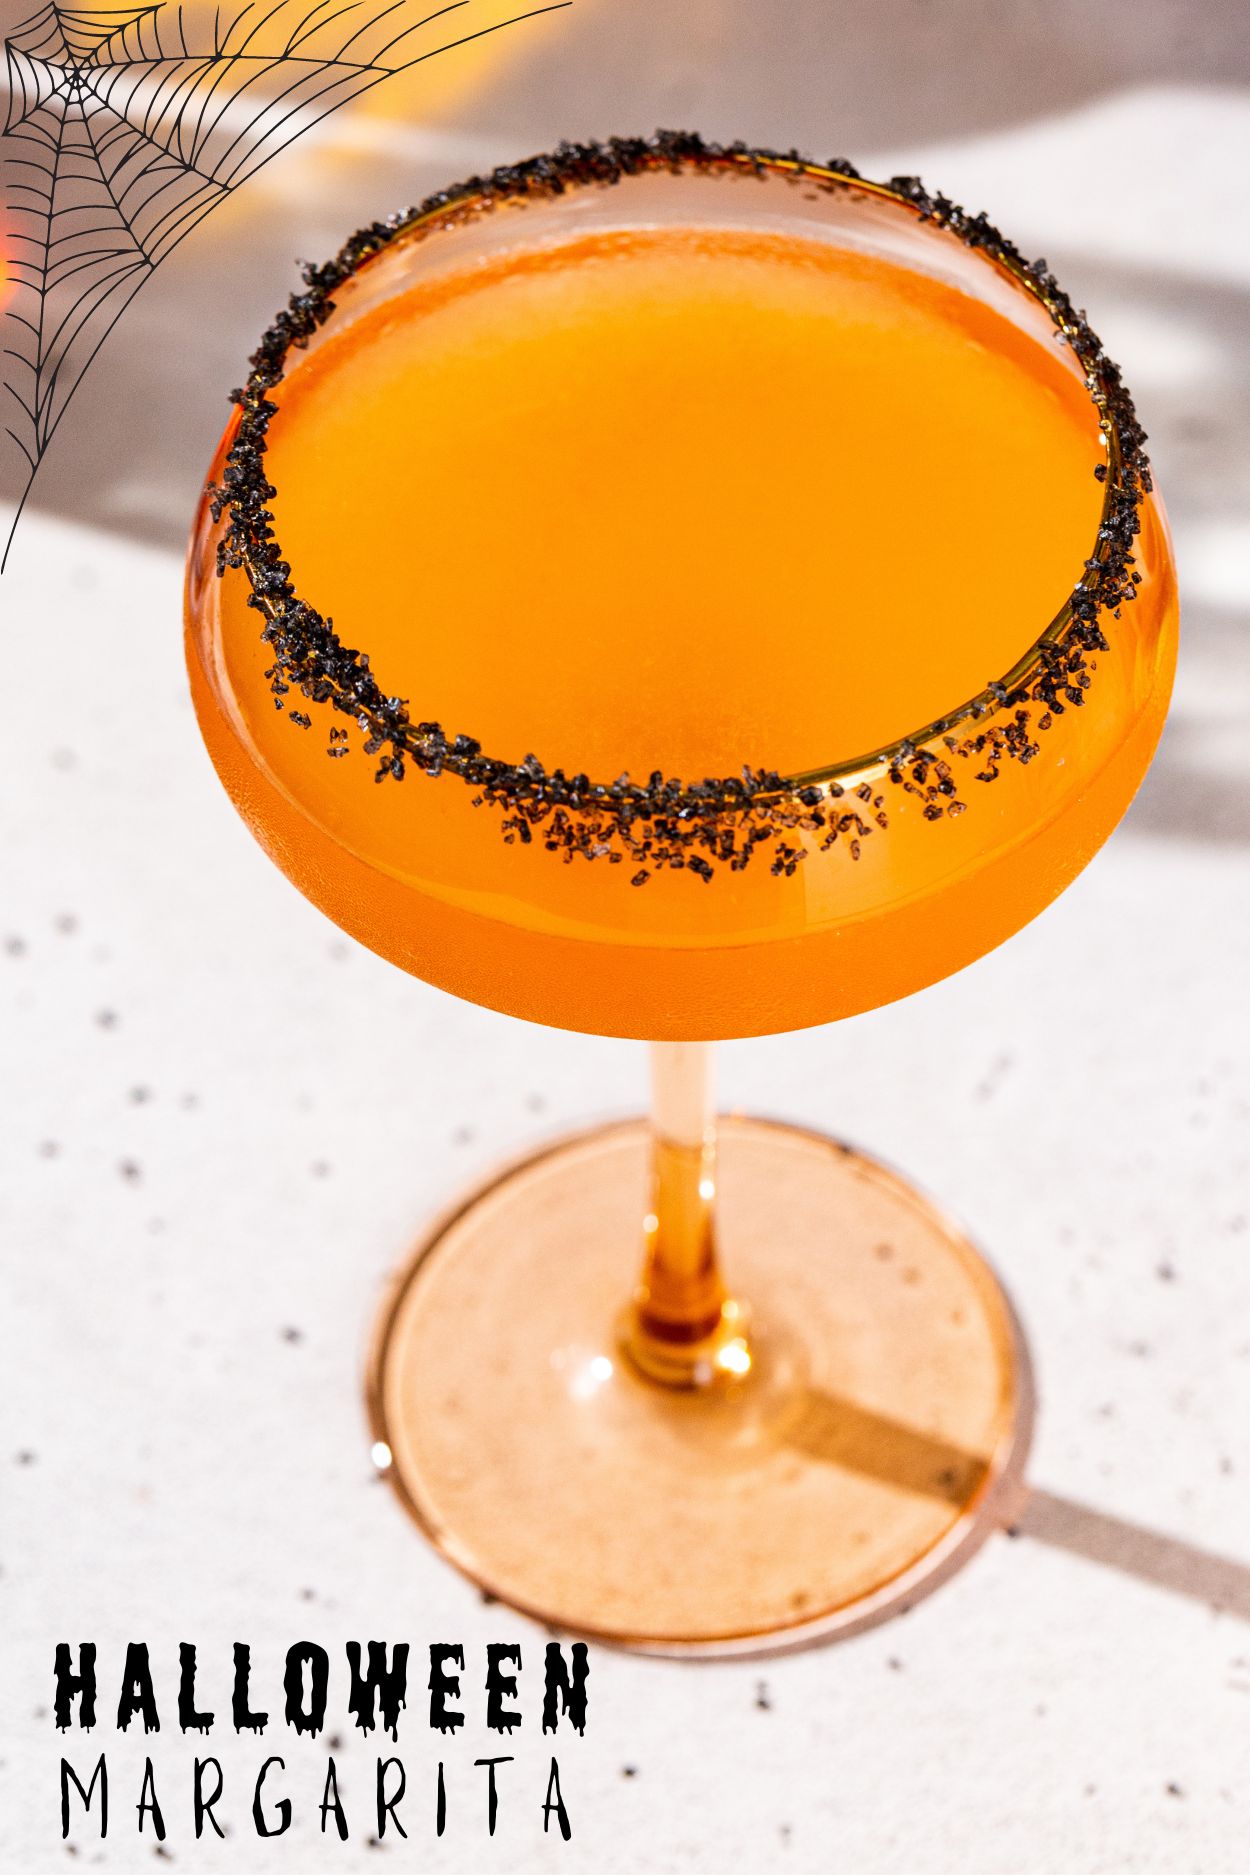 Overhead view of a Halloween Margarita. The drink is in an orange tinted coupe glass and has a black lava salt rim. Text at the bottom says Halloween Margarita.